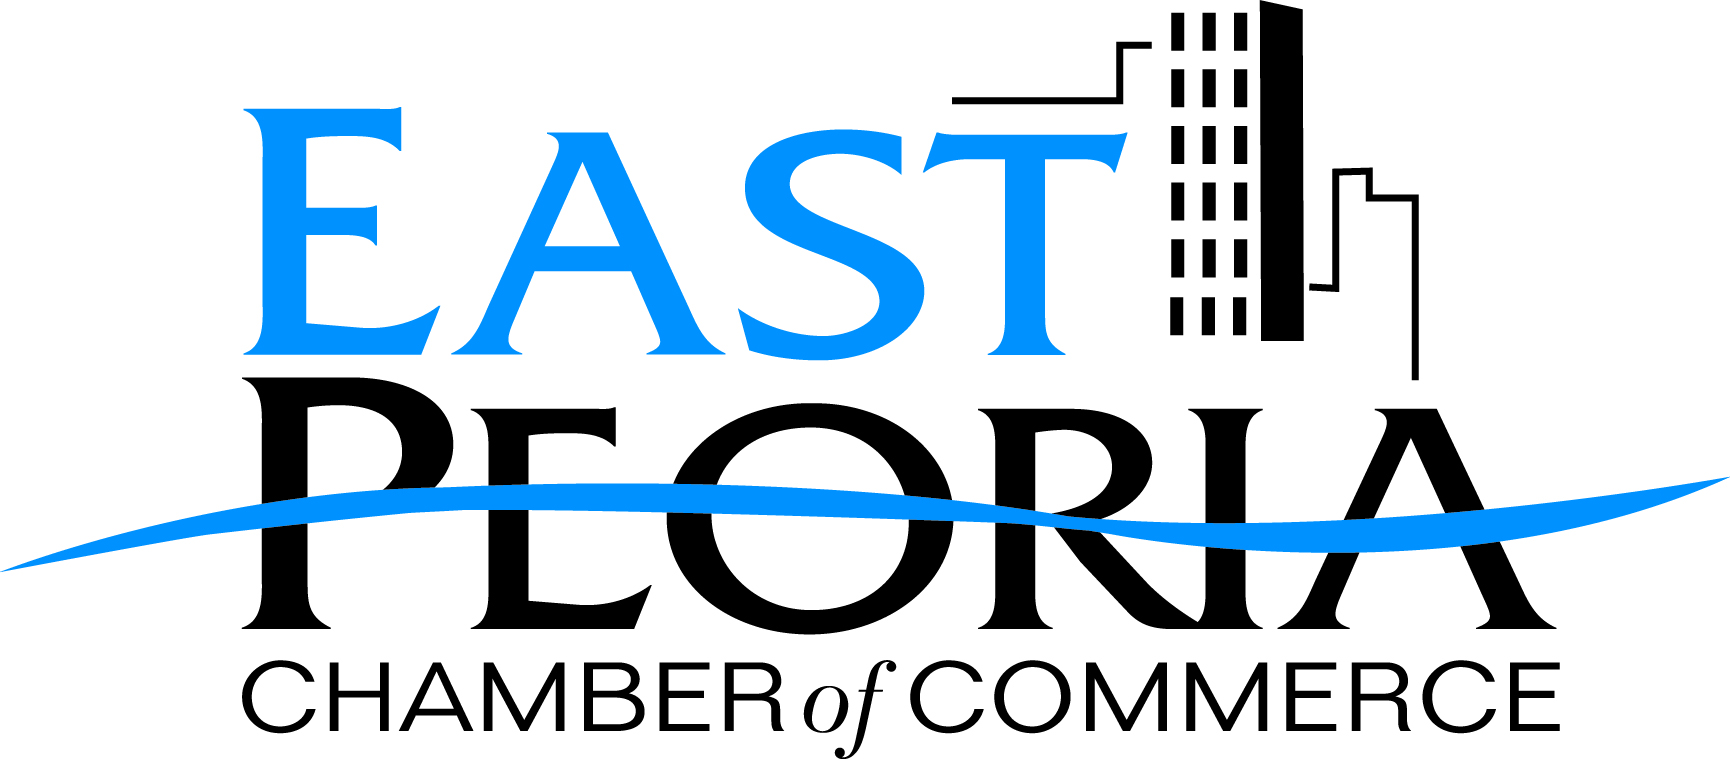 East Peoria Chamber of Commerce Logo